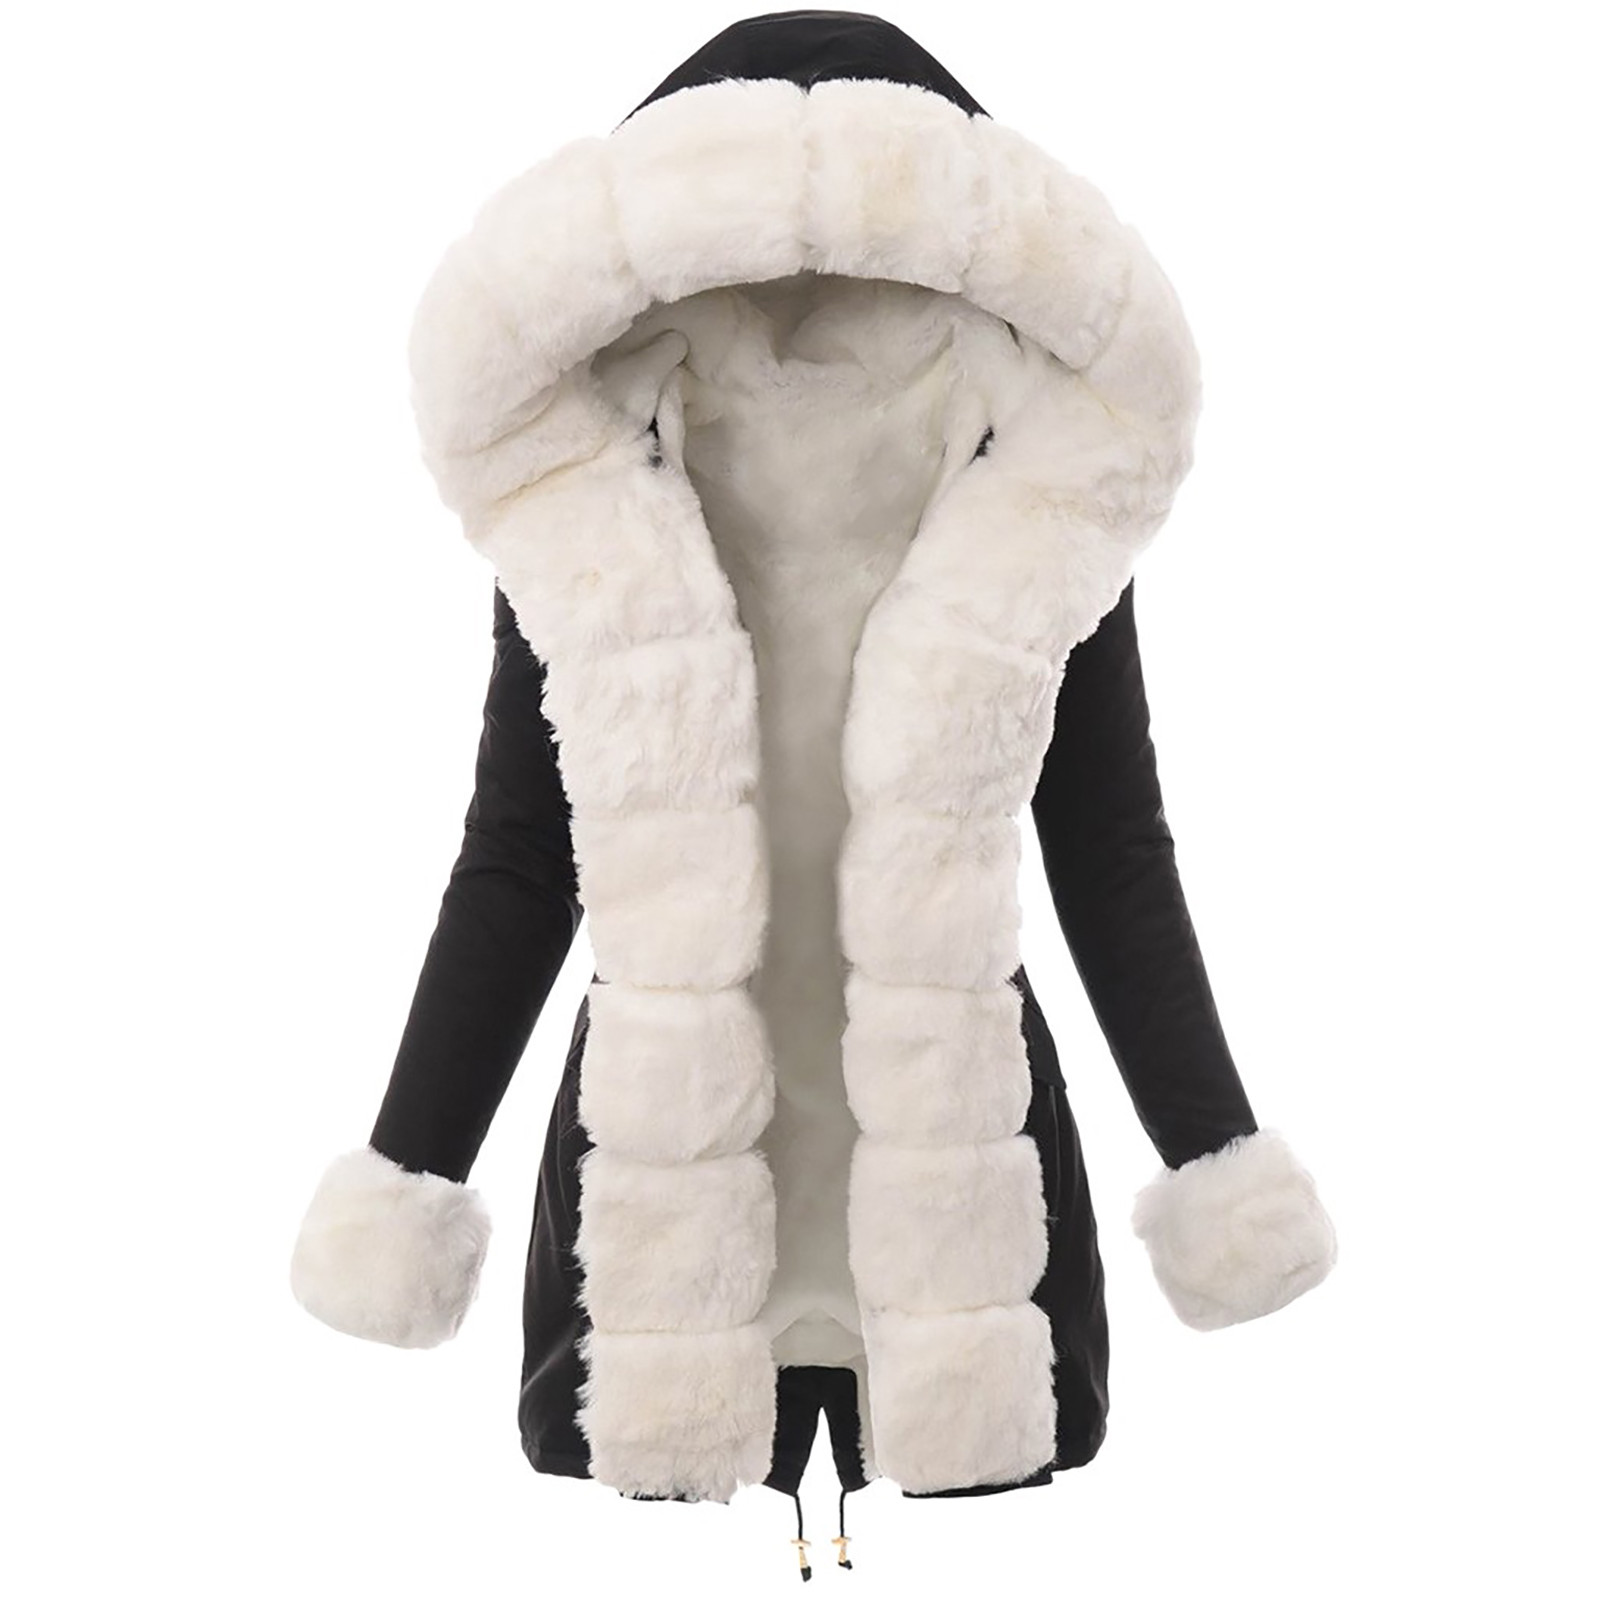 Winter Snow Coat Cotton Jacket Women Hooded Thick Oversized 2020 Casual Fashion Long Overcoat Female Solid Ladies Tops #T2G